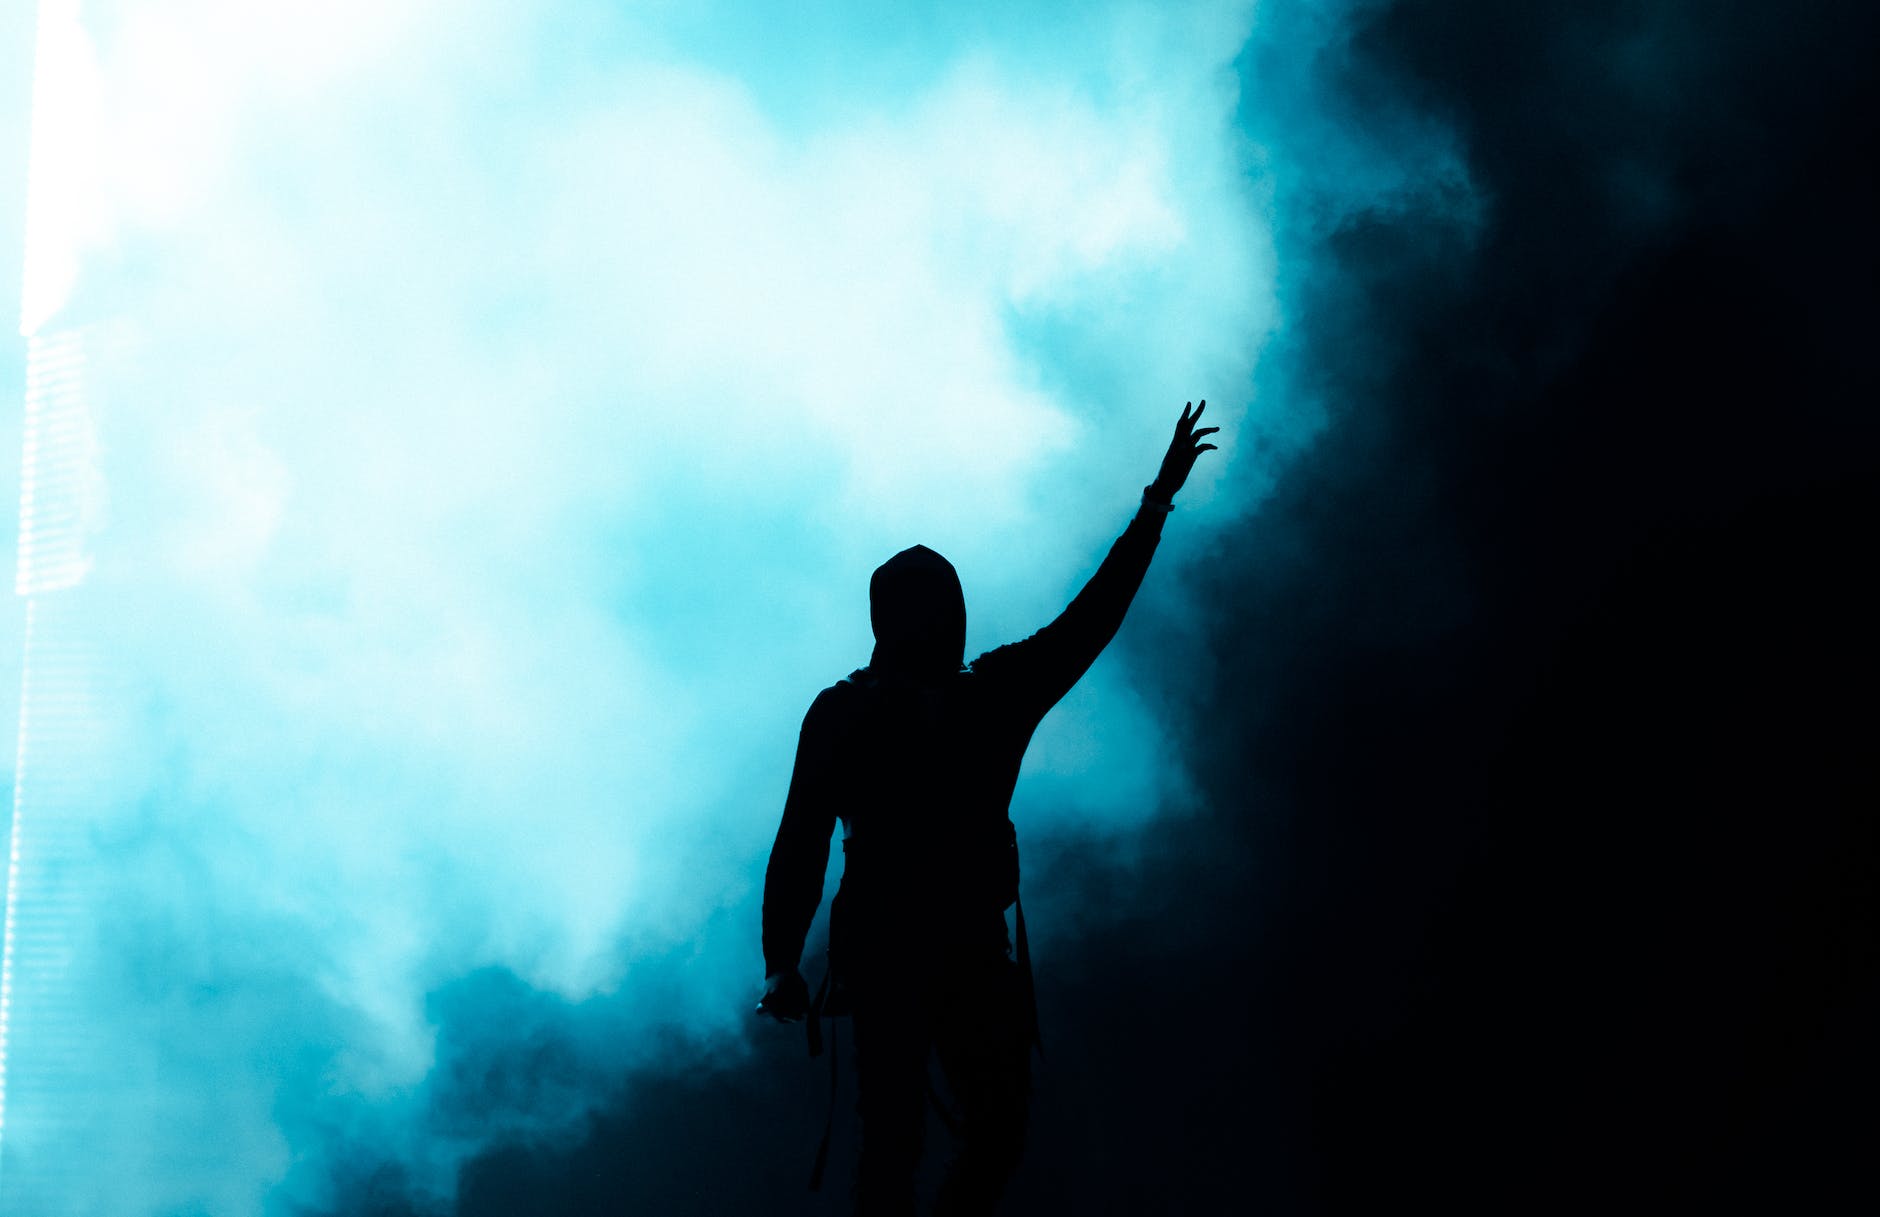 dark silhouette with hand reaching up for light in smoke